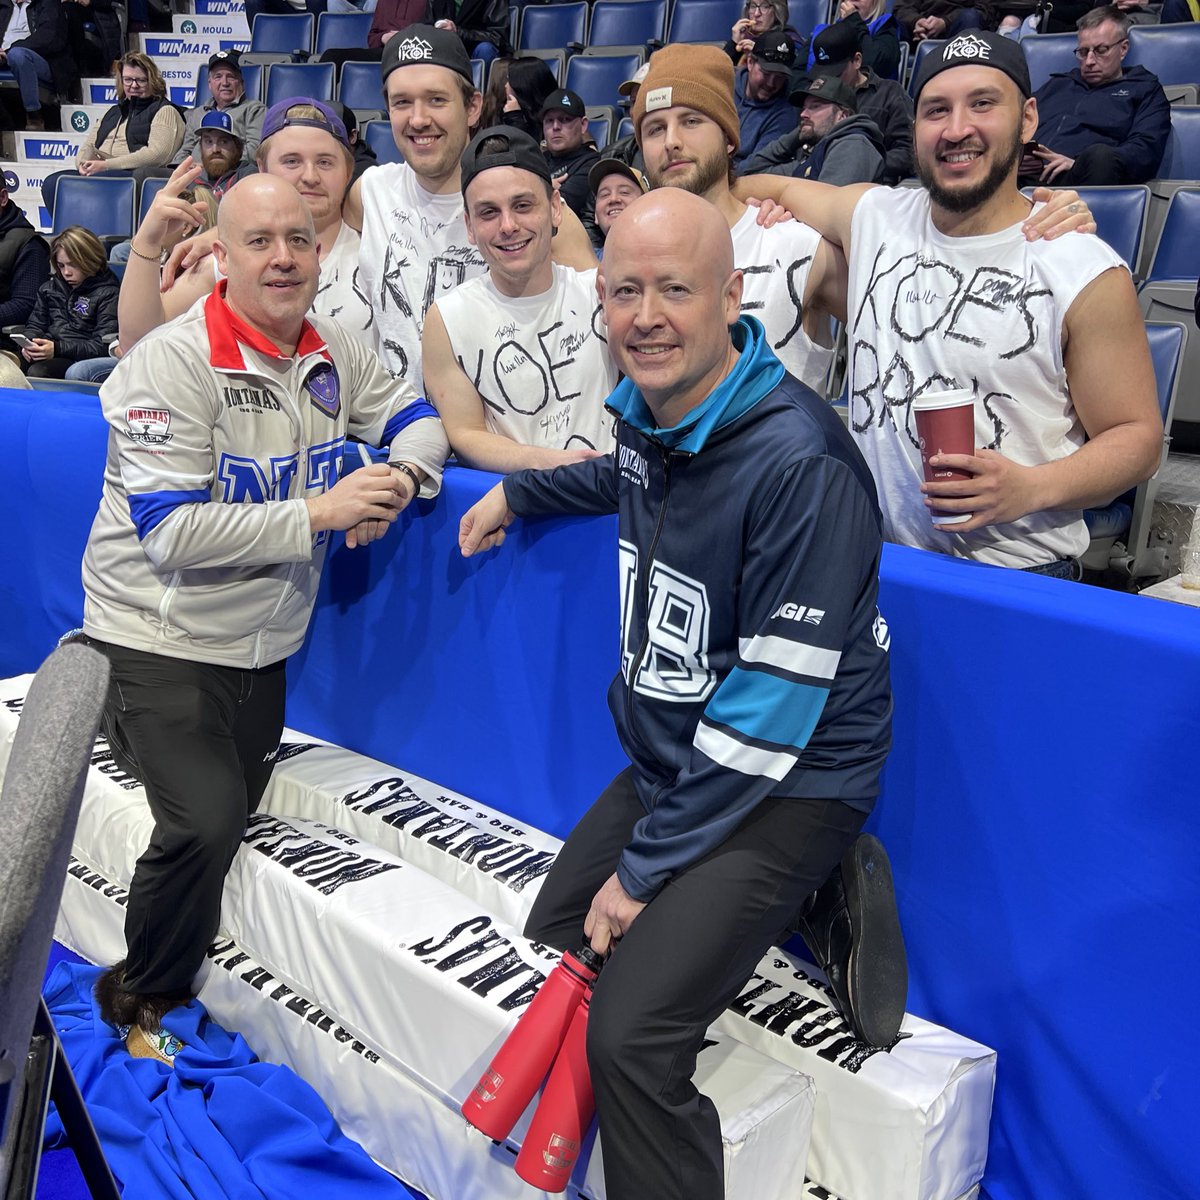 KOE’S BRO’S ‘Nuff said! And believe it or not, they made the shirts themselves 👕 #Brier2024